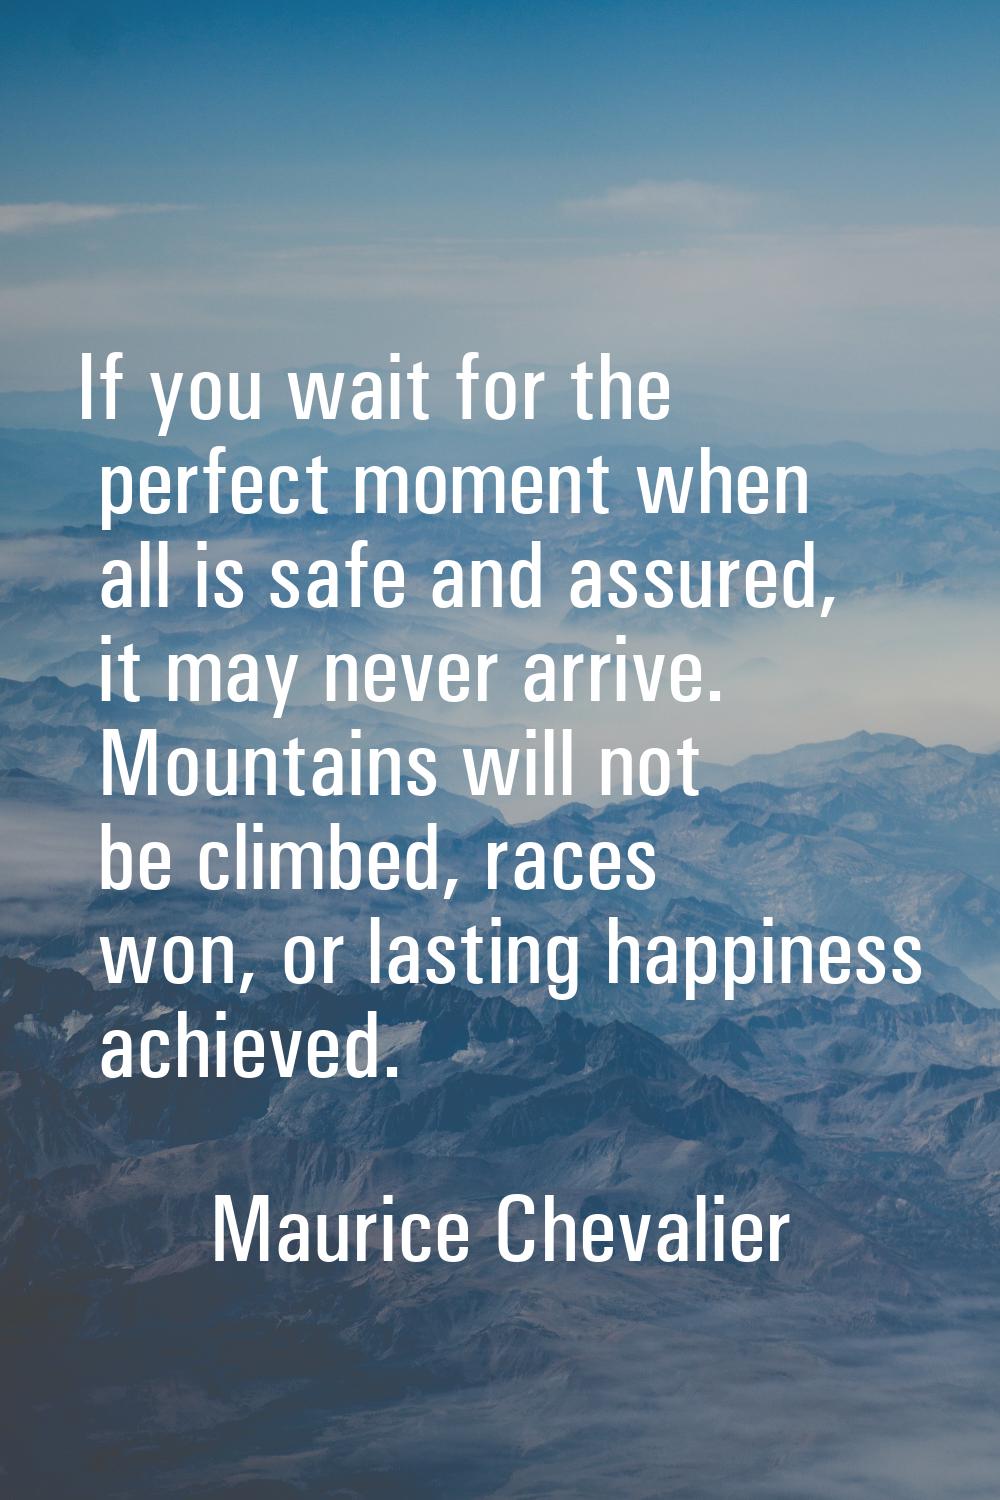 If you wait for the perfect moment when all is safe and assured, it may never arrive. Mountains wil